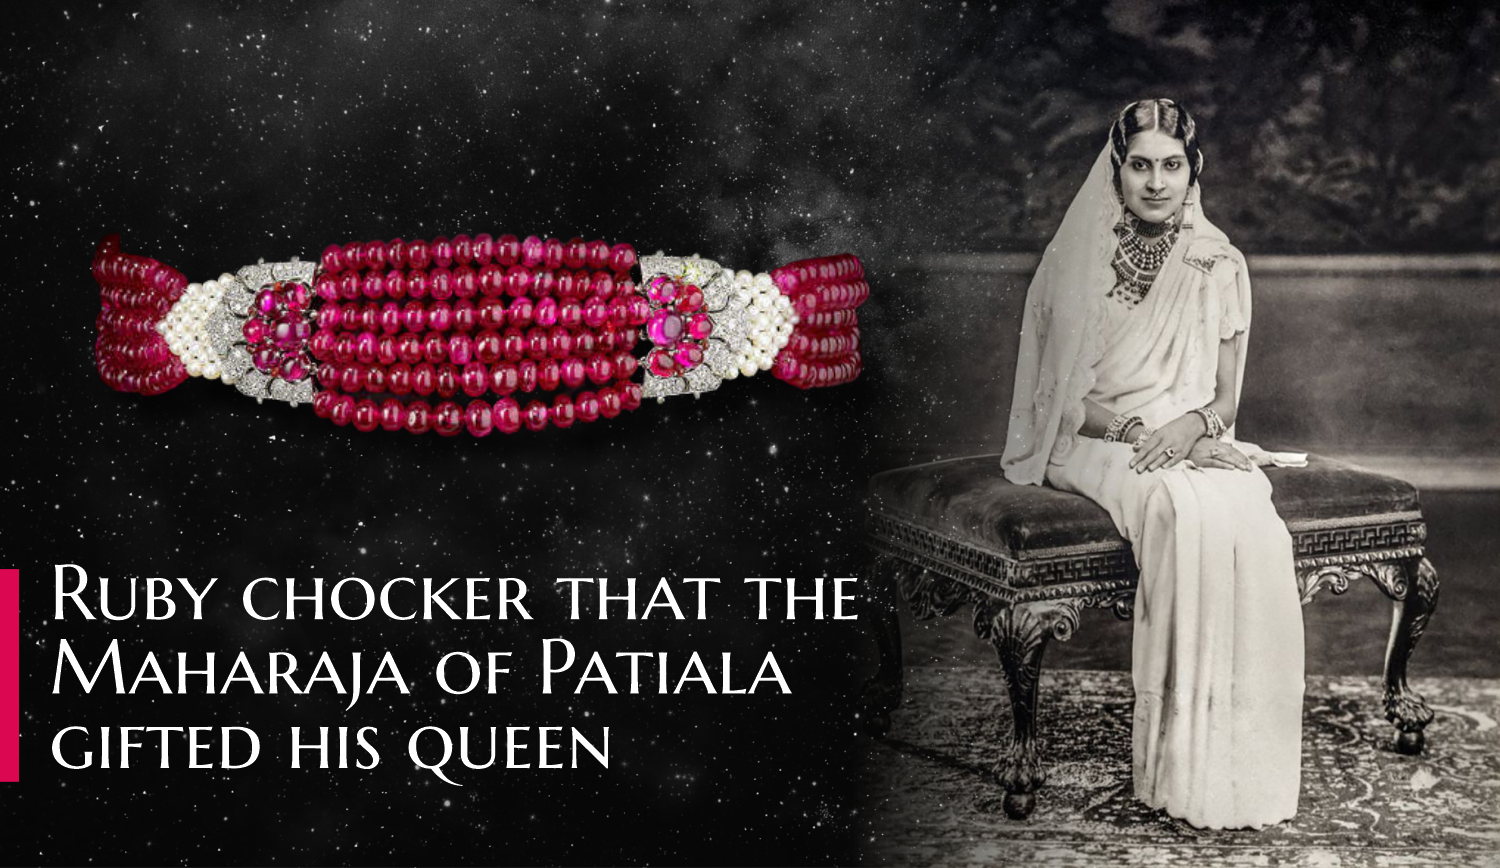 Read about this spectacular Ruby chocker that the Maharaja of Patiala gifted his queen